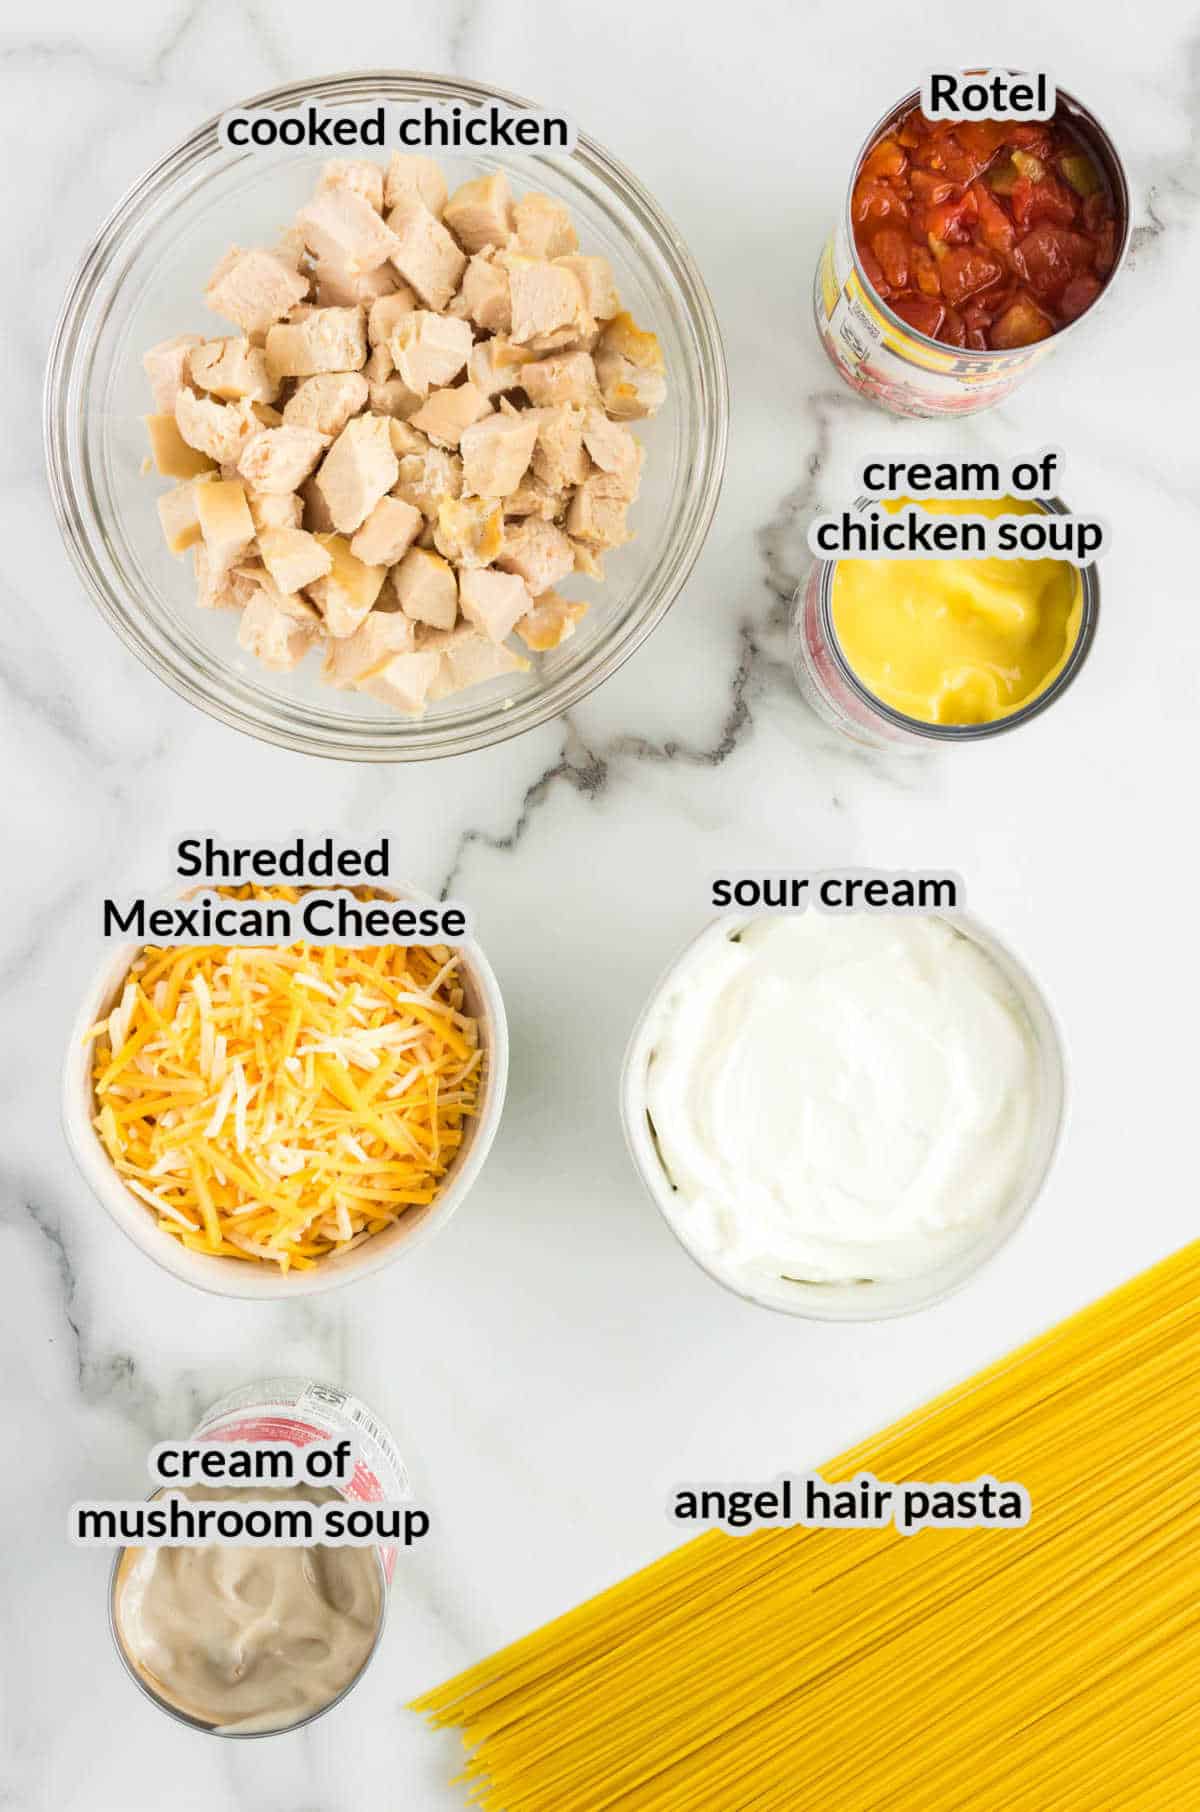 Overhead Image of Chicken Spaghetti Ingredients